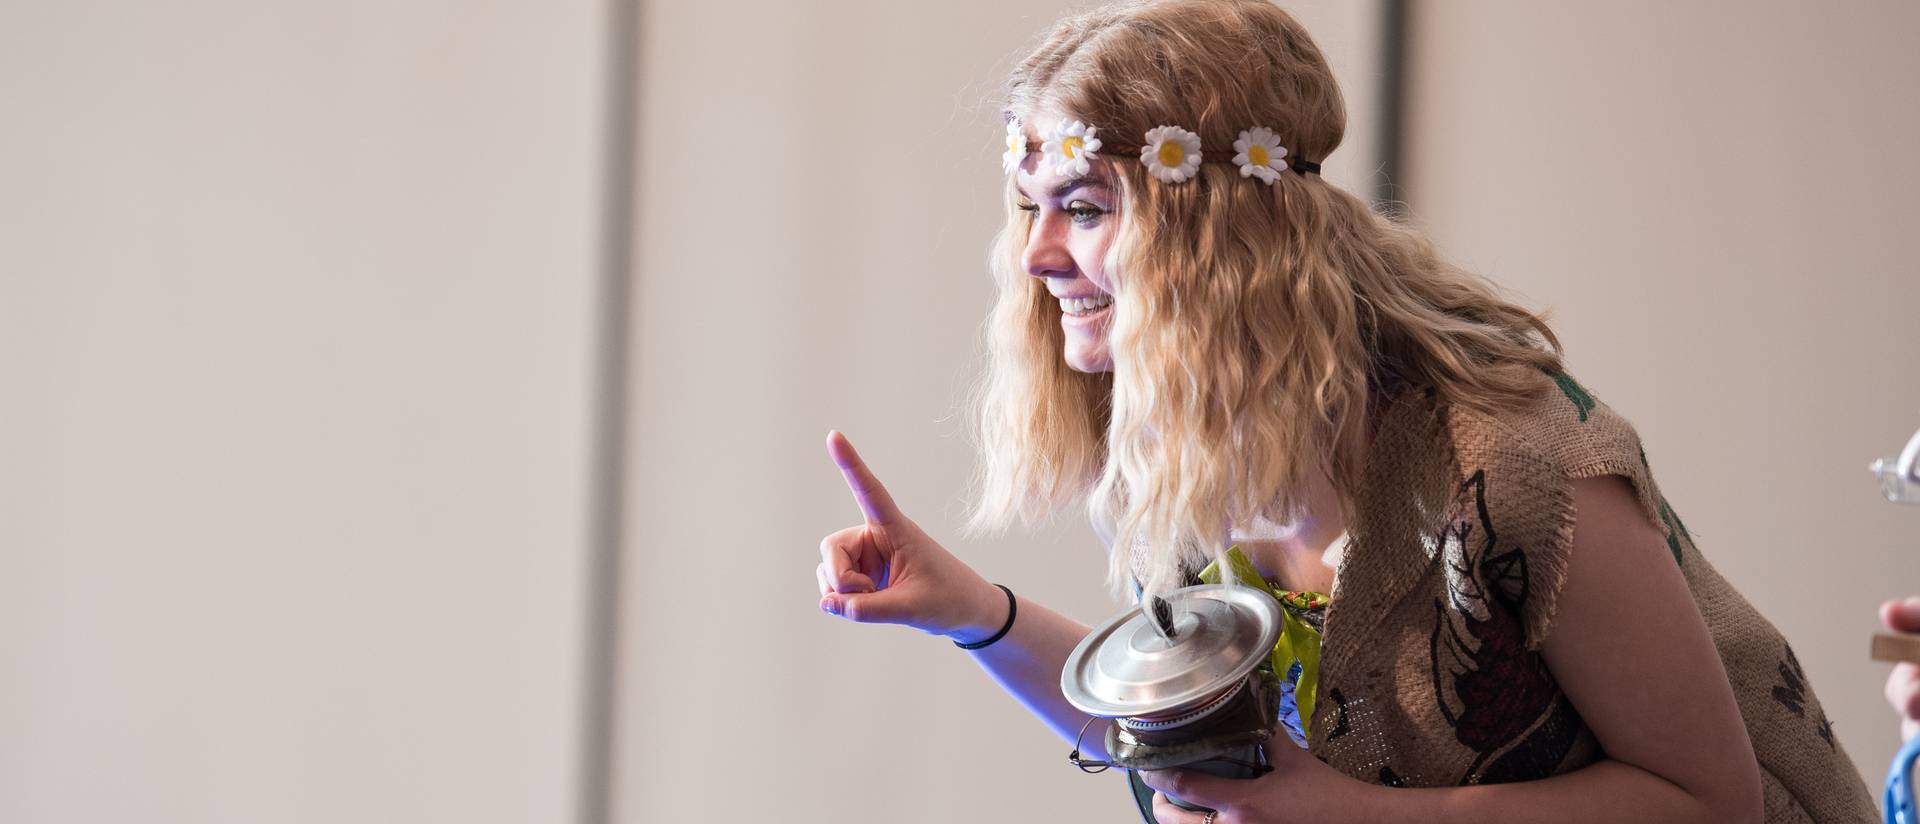 A student wears an outfit made from recycled materials for the Just Bag It Fashion Show.